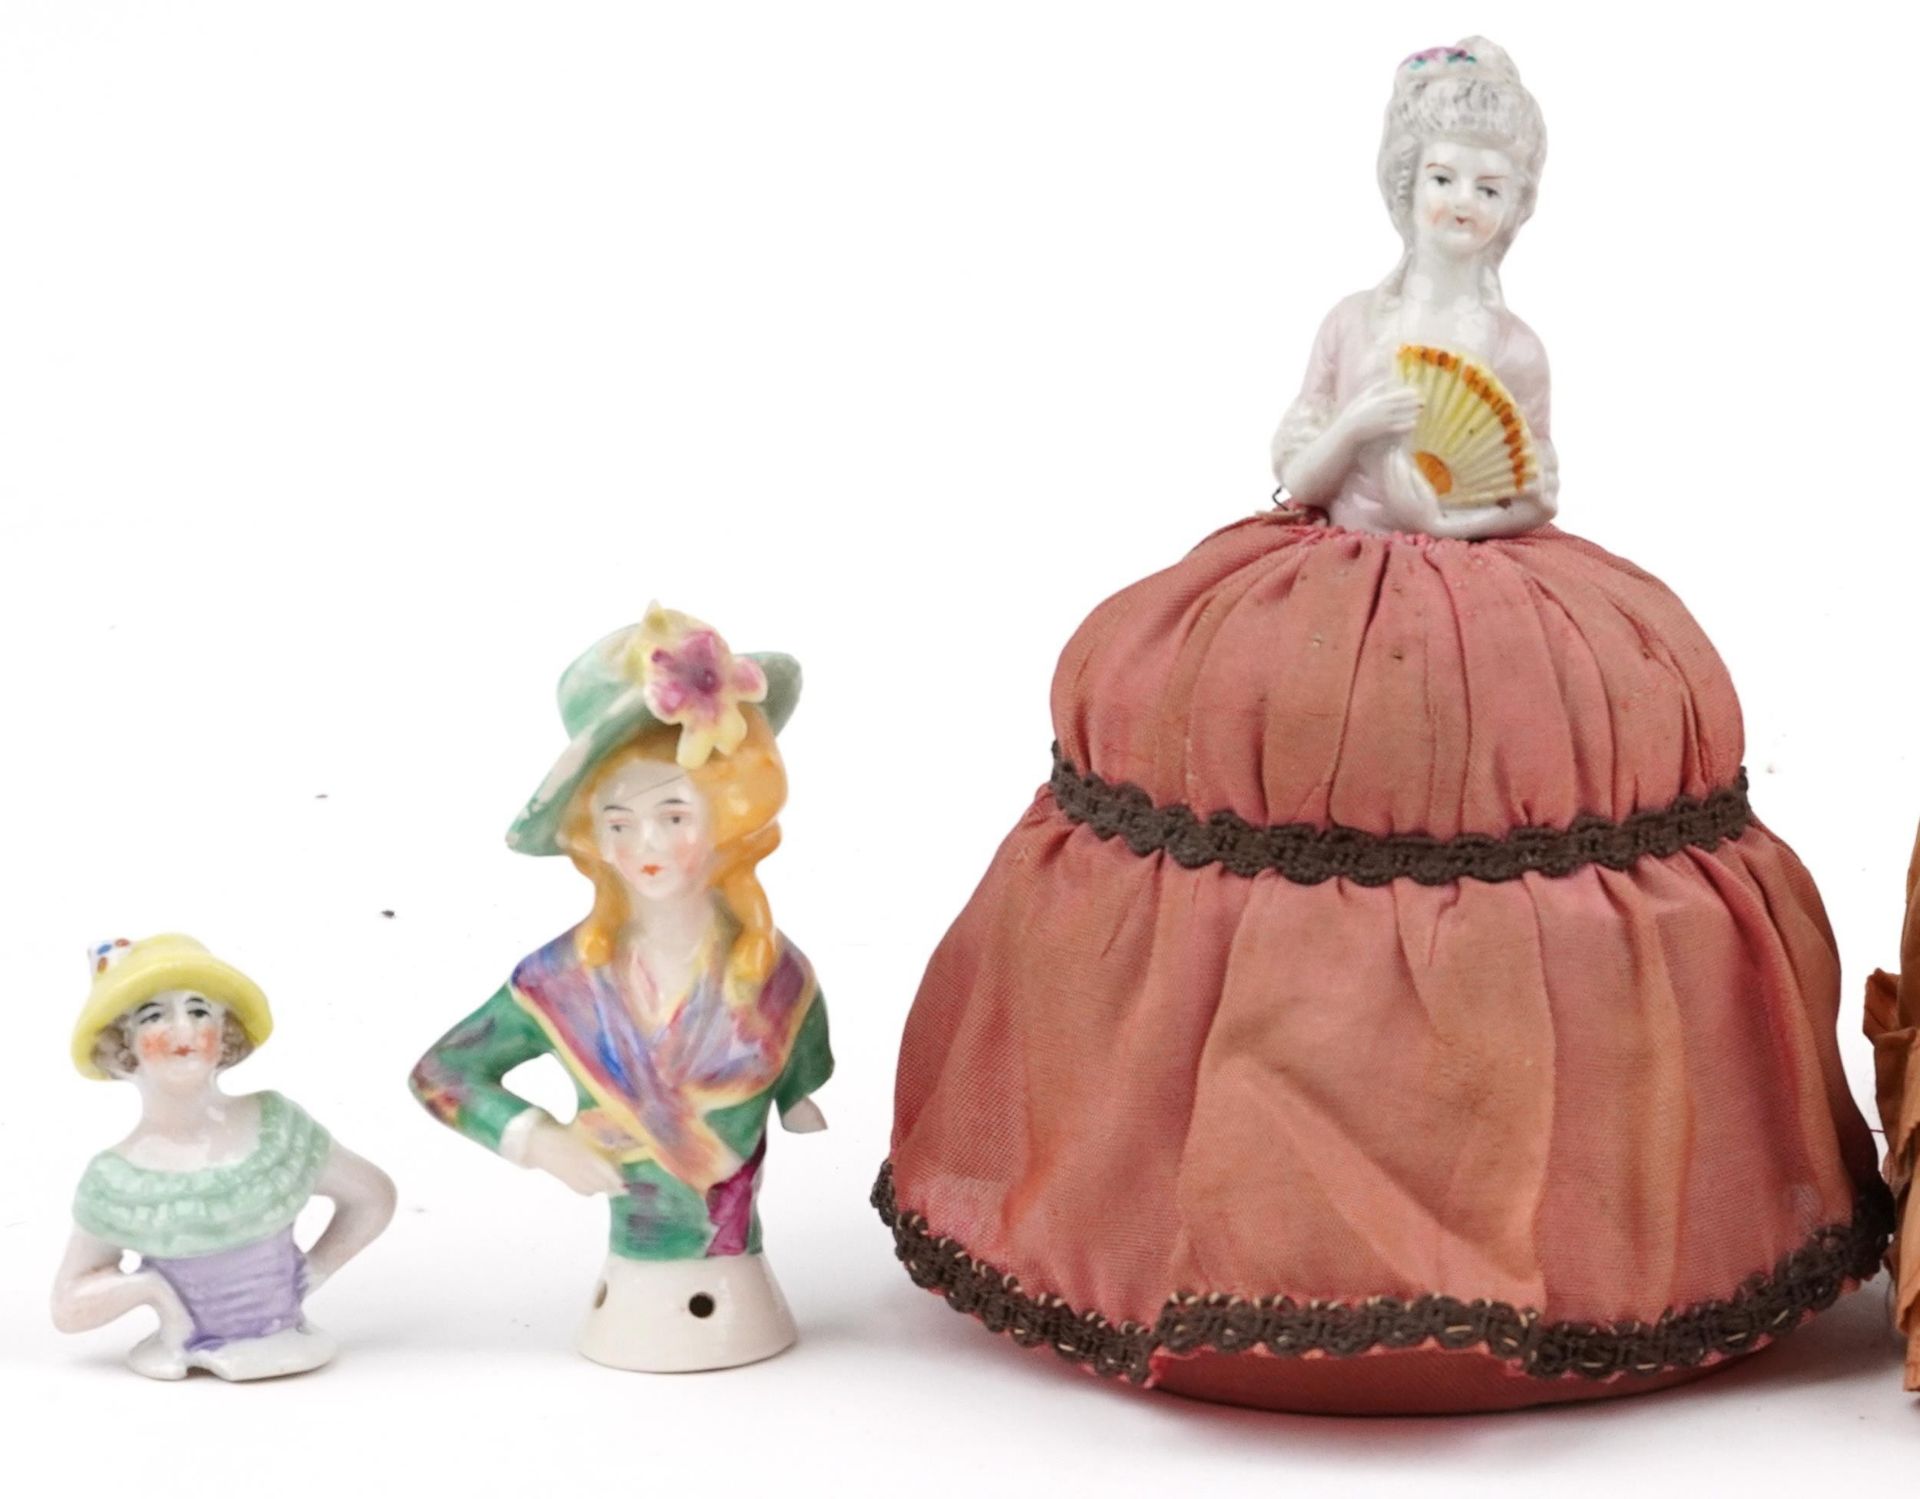 19th century and later half pin dolls including three pin cushions, the largest 21cm high - Image 2 of 5